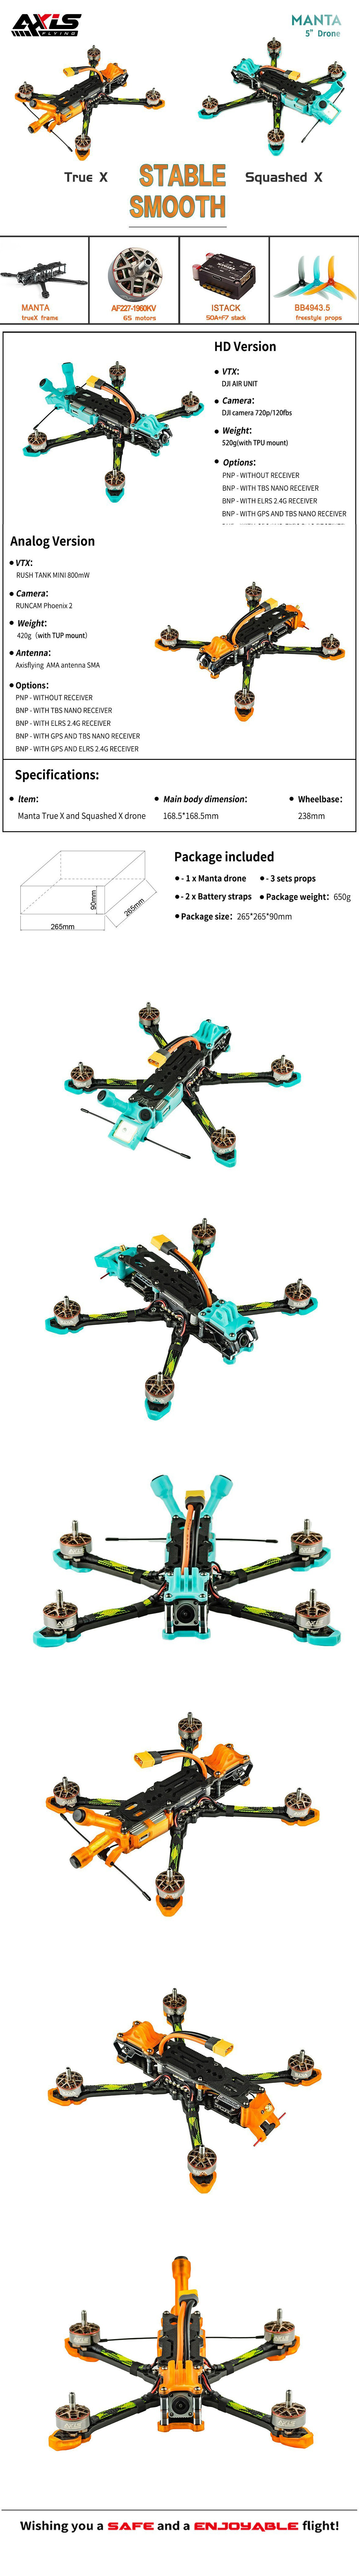 Axisflying MANTA5" / 5inch fpv freestyle Ture X / Squashed X drone with GPS MANTA 5" DRONE  cinematic drone,cinewhoop drone,longrange drone,freestyle drone,fpv drone,fpv quads,5inch freestyle drone,7inch longrange drone,5inch quads,6inch quads,7inch LR quads,7" fpv drone,7" fpv quads,7" longrange quads,6" cinematic quads,5"cinematic drone